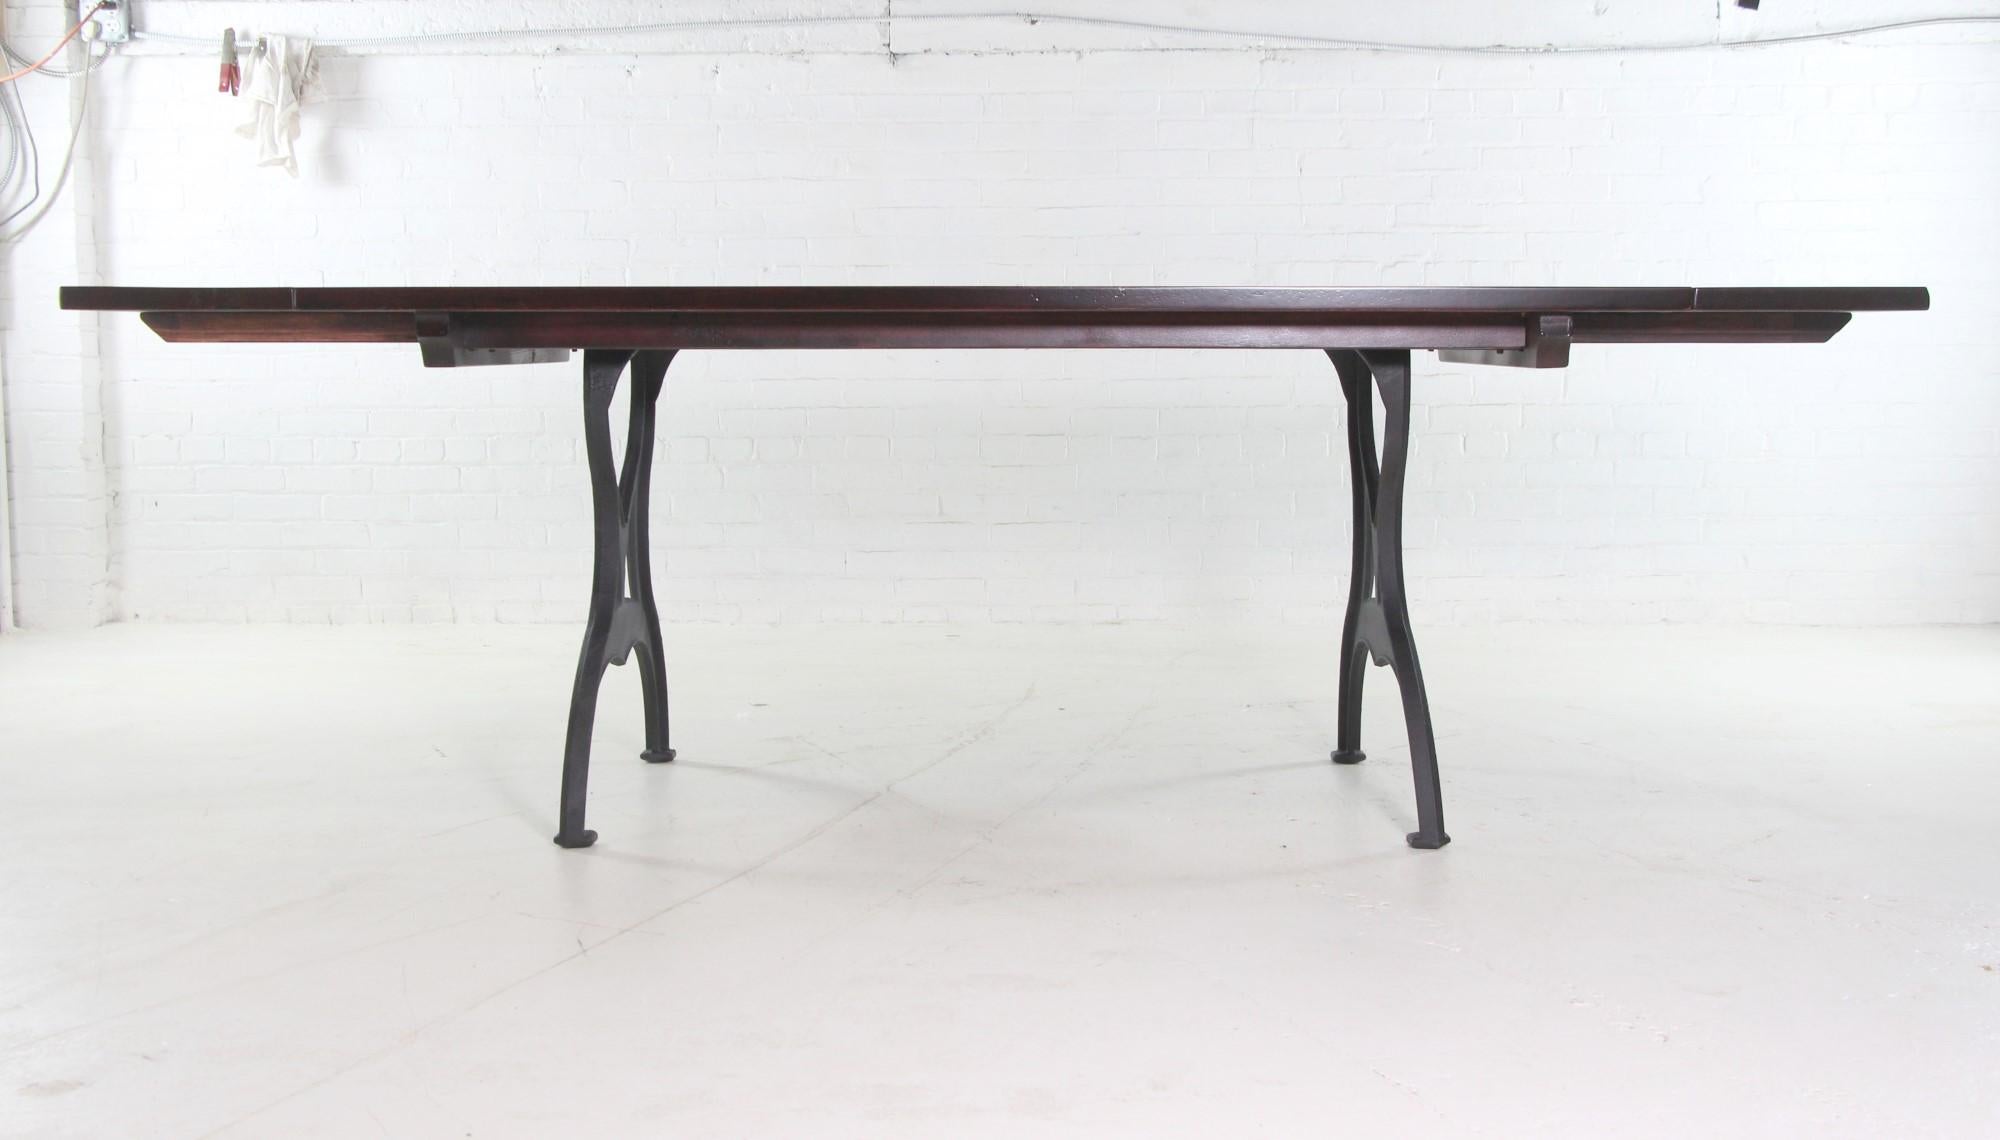 Red Mahogany Apitong Table w Extensions Cast Iron Legs Brooklyn, NY For Sale 7